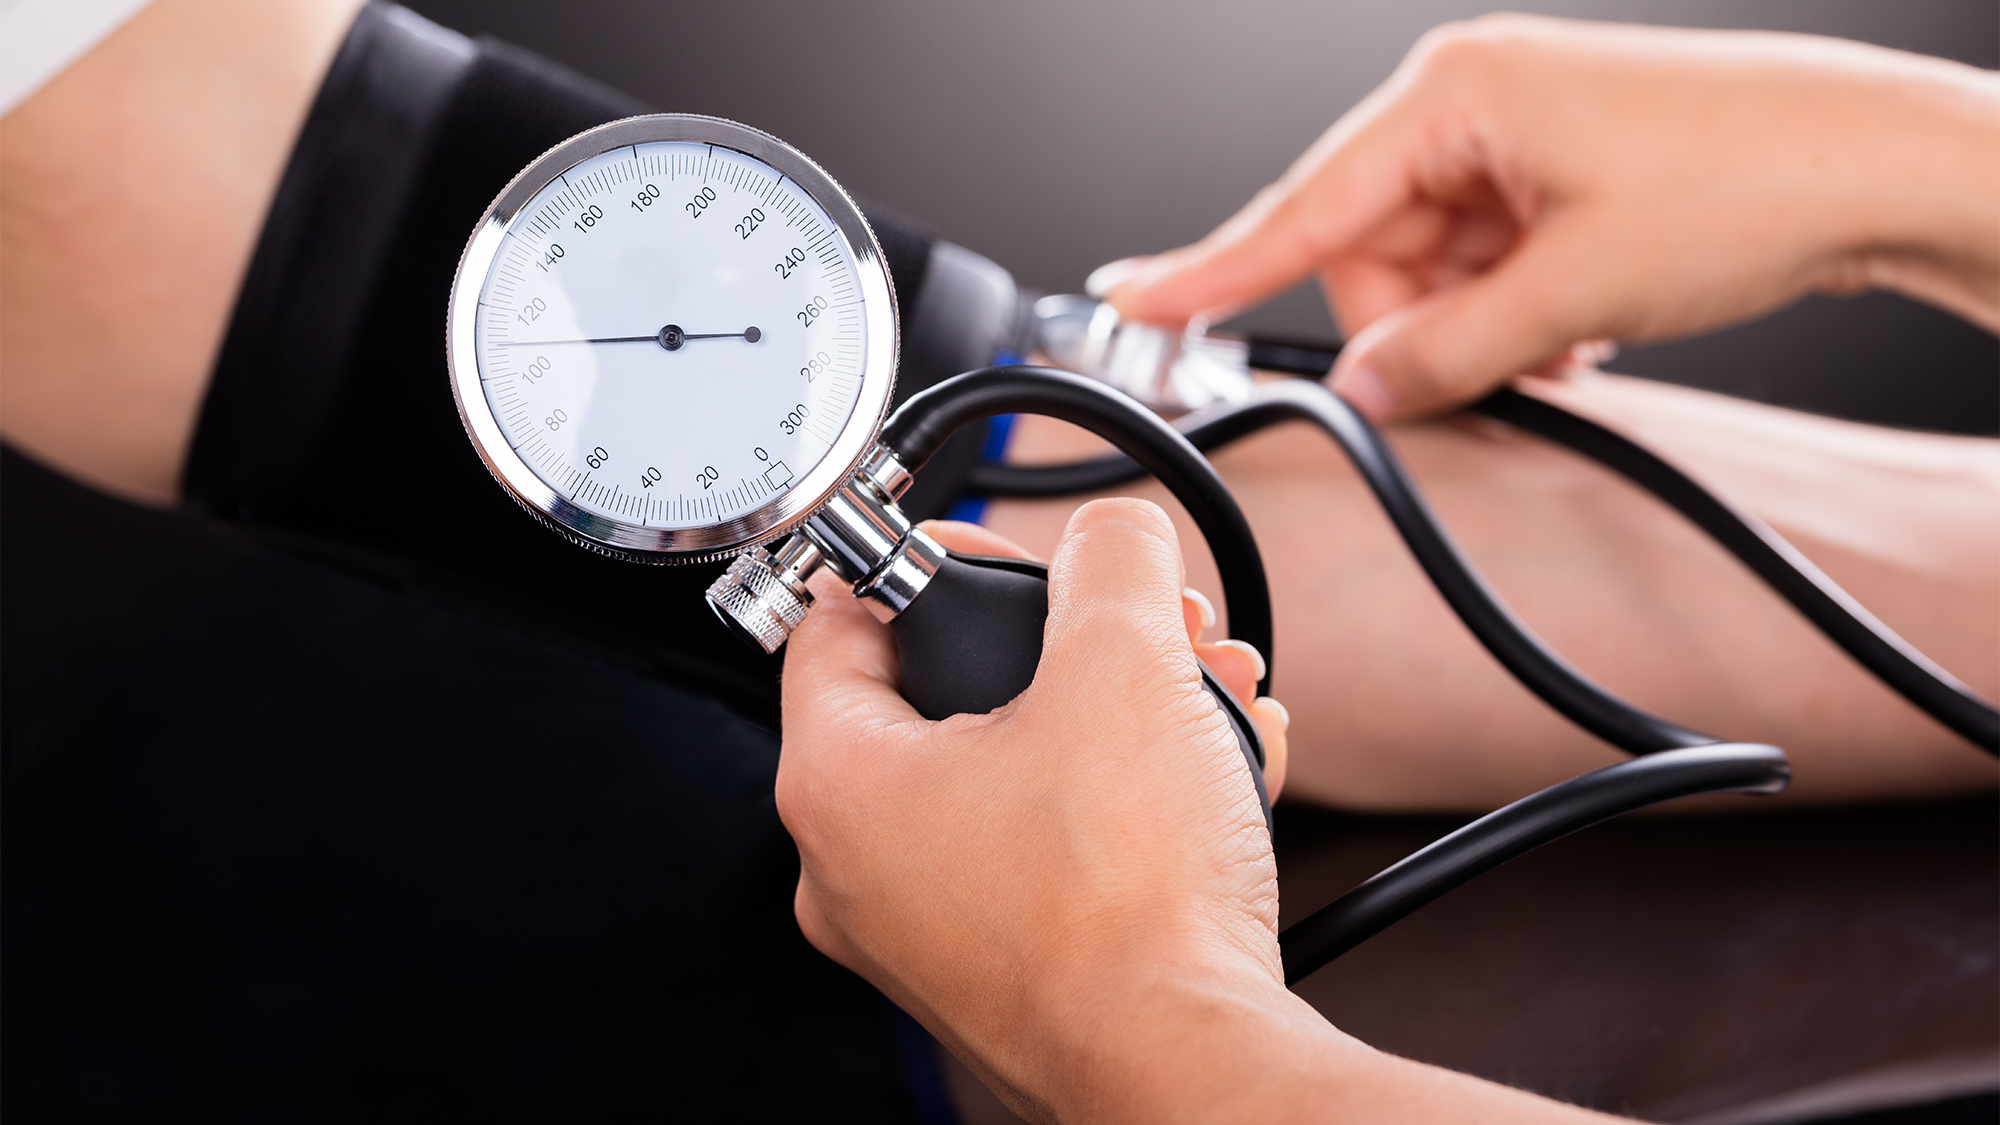 A doctor uses a blood pressure cuff to take a patient's blood pressure.